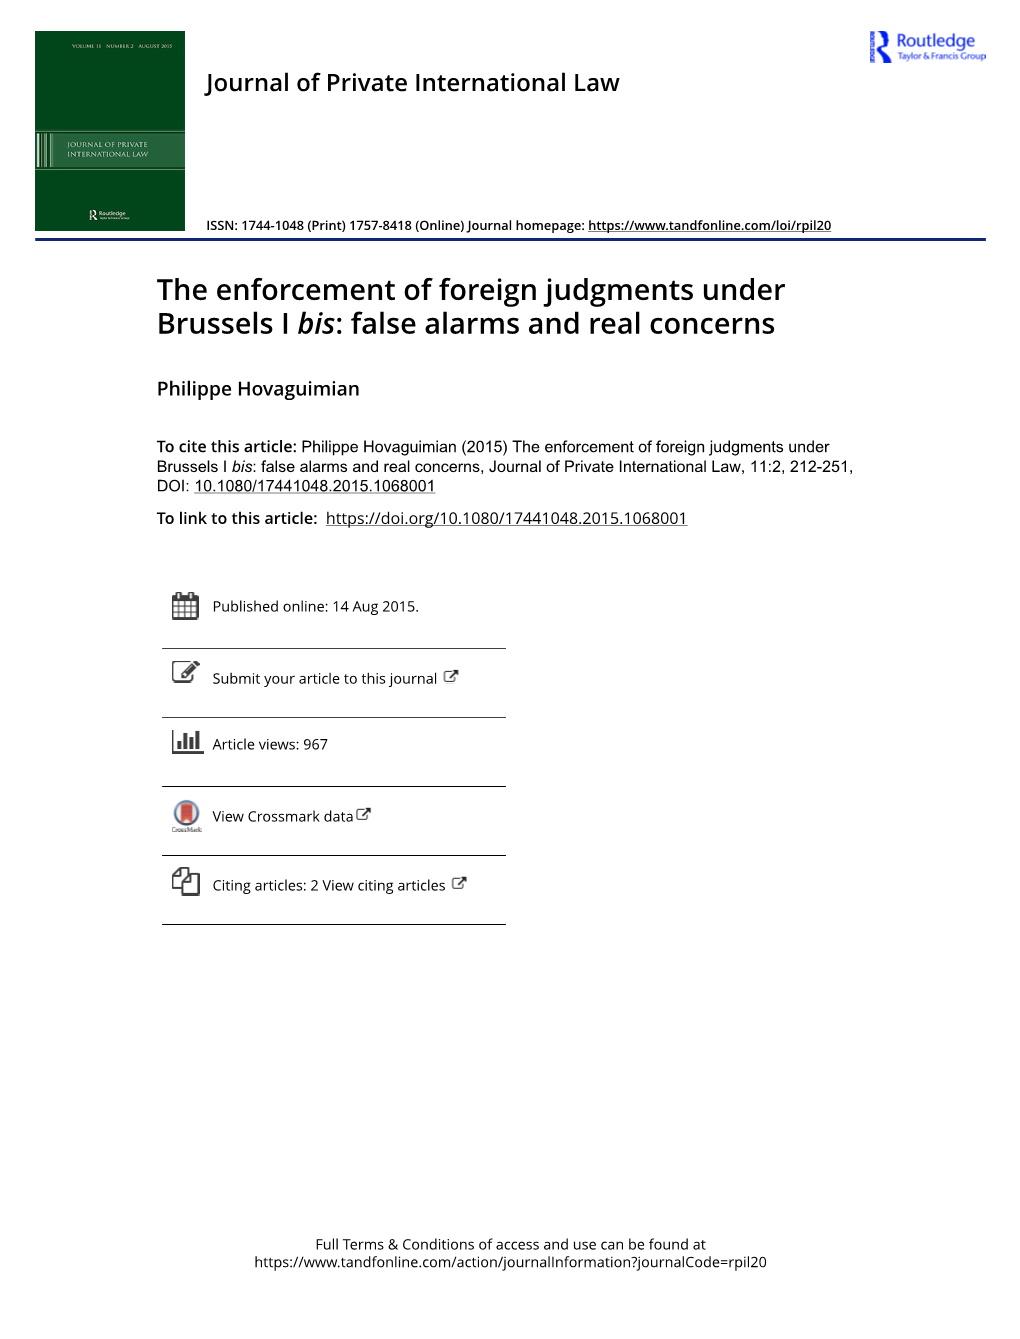 The Enforcement of Foreign Judgments Under Brussels I Bis: False Alarms and Real Concerns